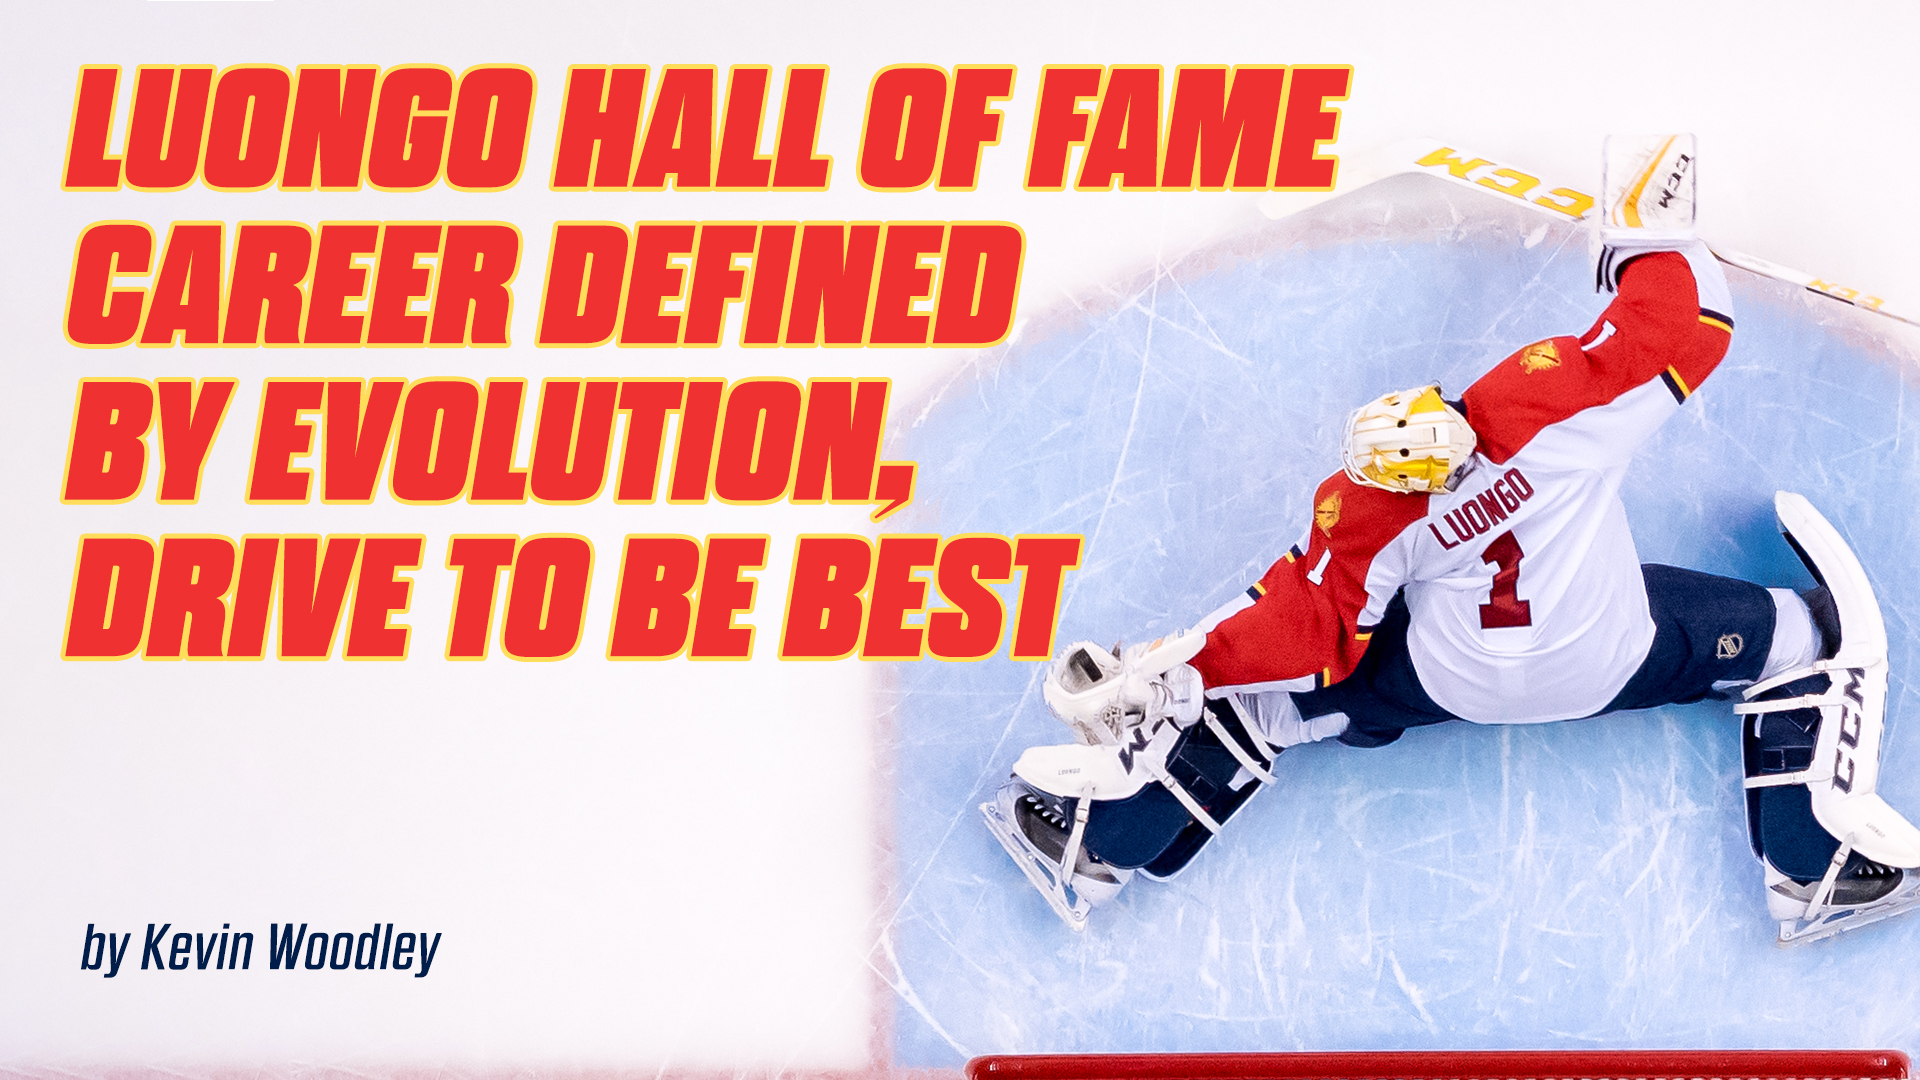 Luongo Hall of Fame Career Defined by Evolution, Drive to be Best